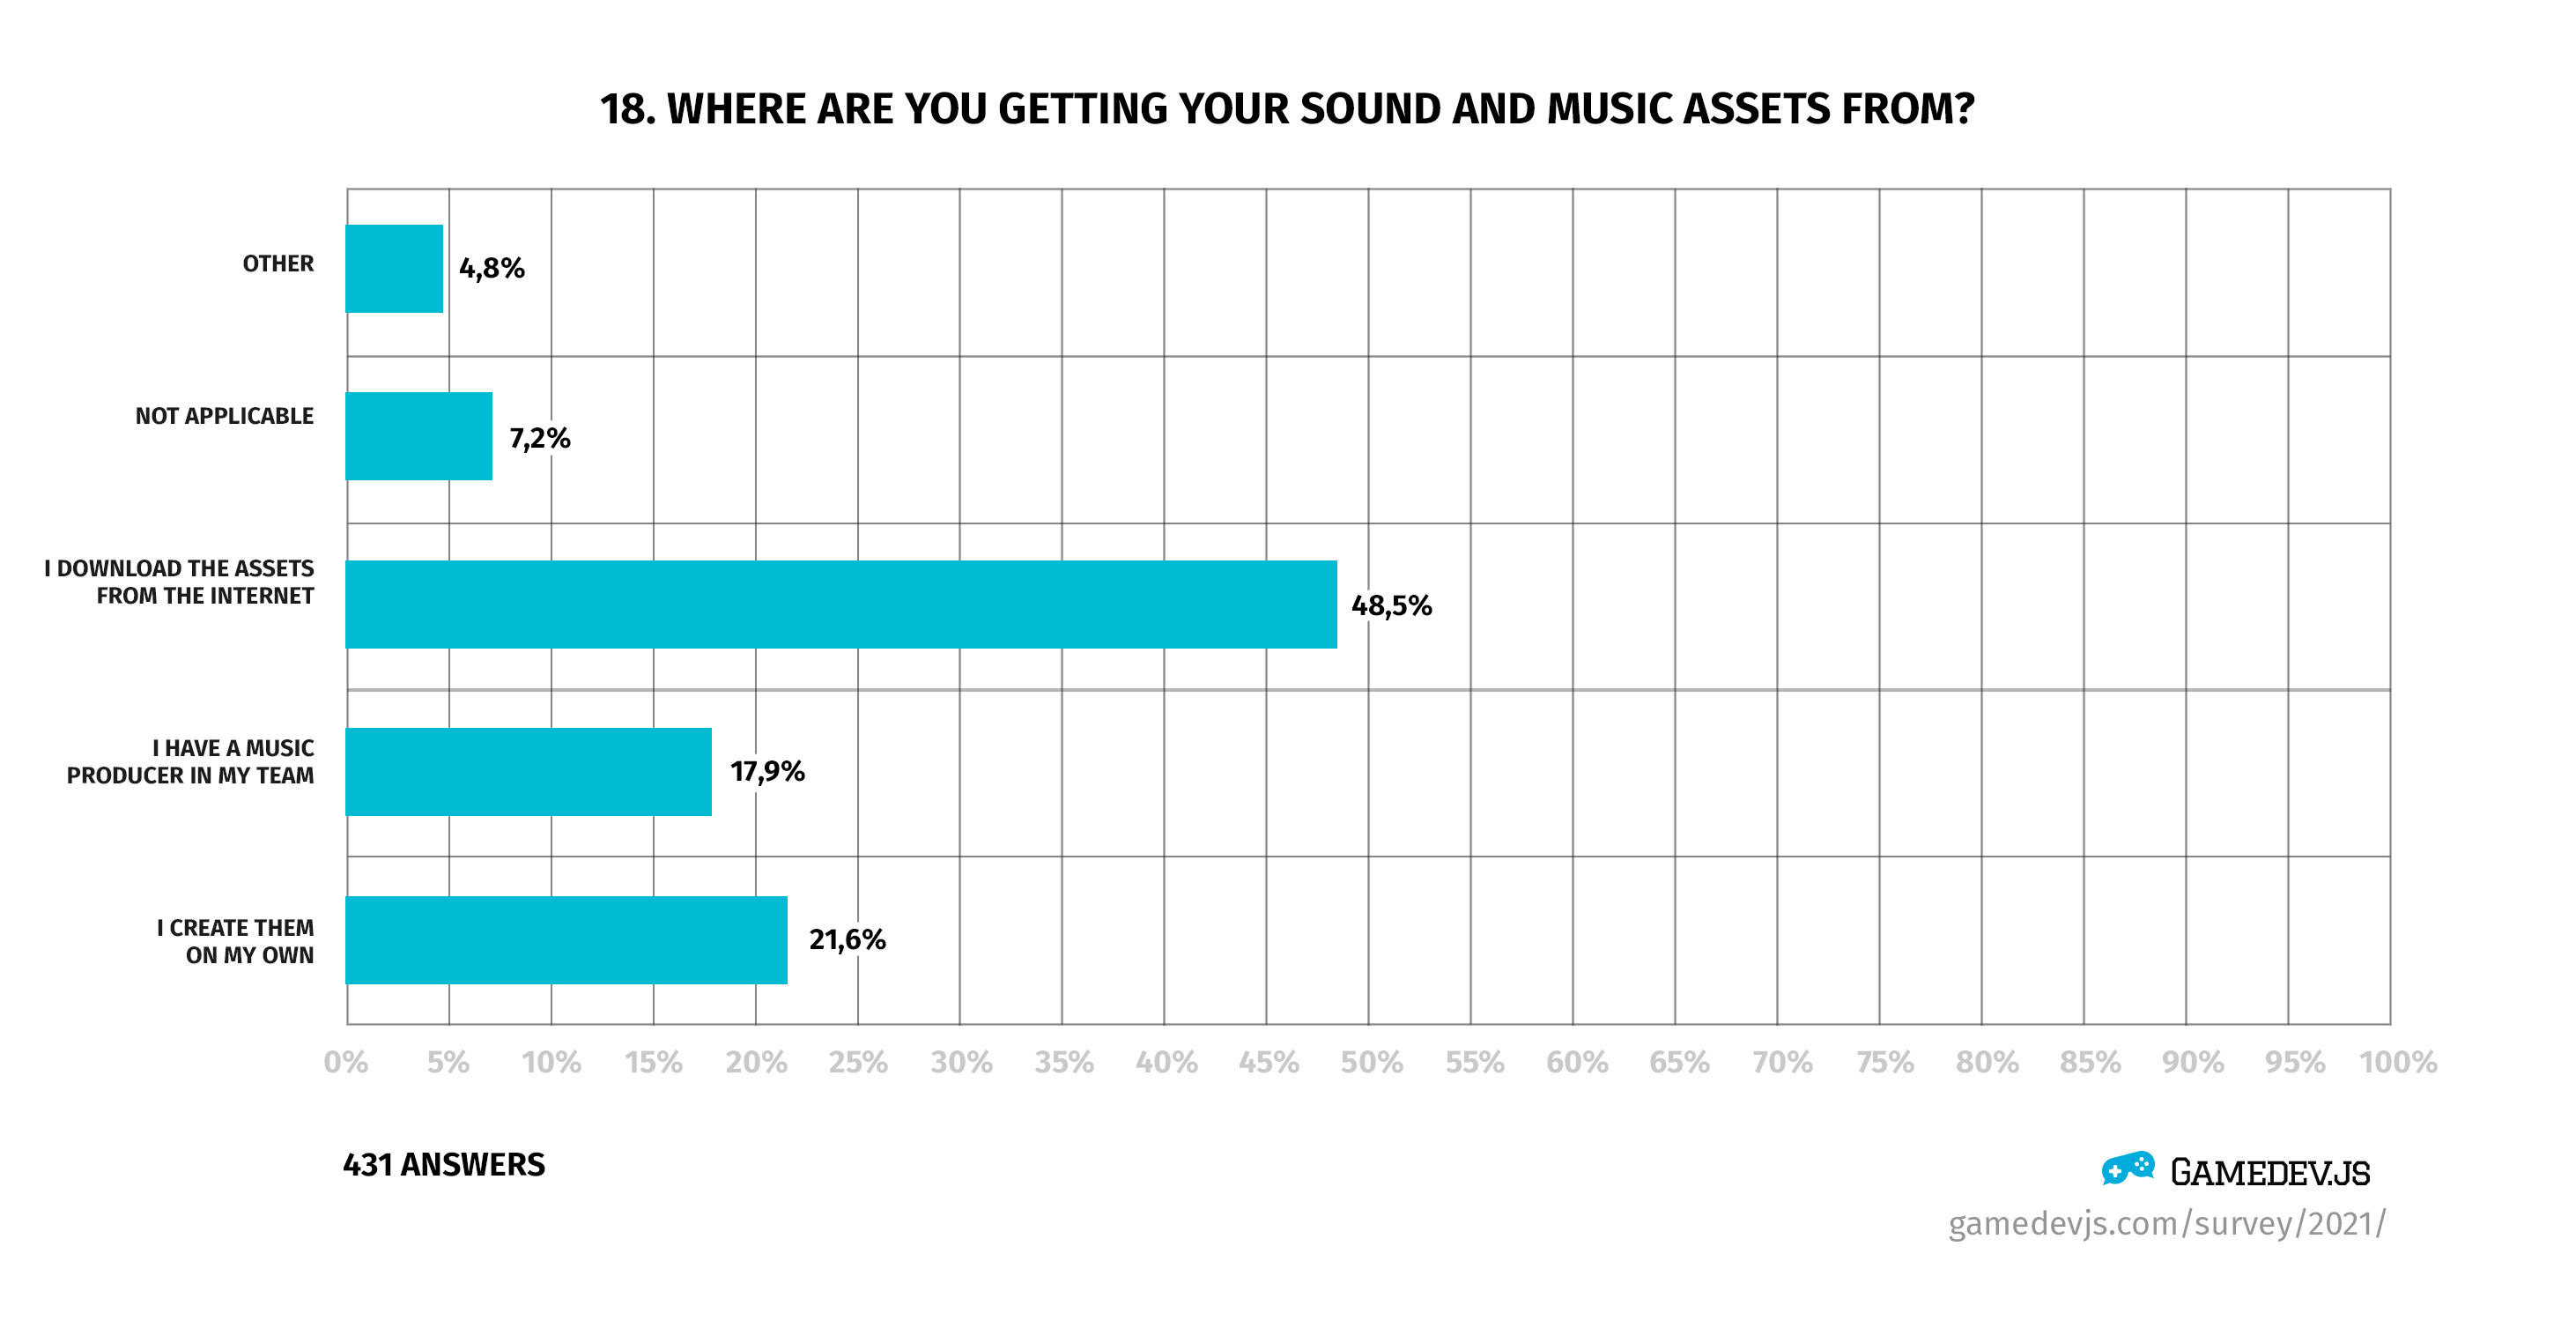 Gamedev.js Survey 2021 - Question #18: Where are you getting your sound and music assets from?